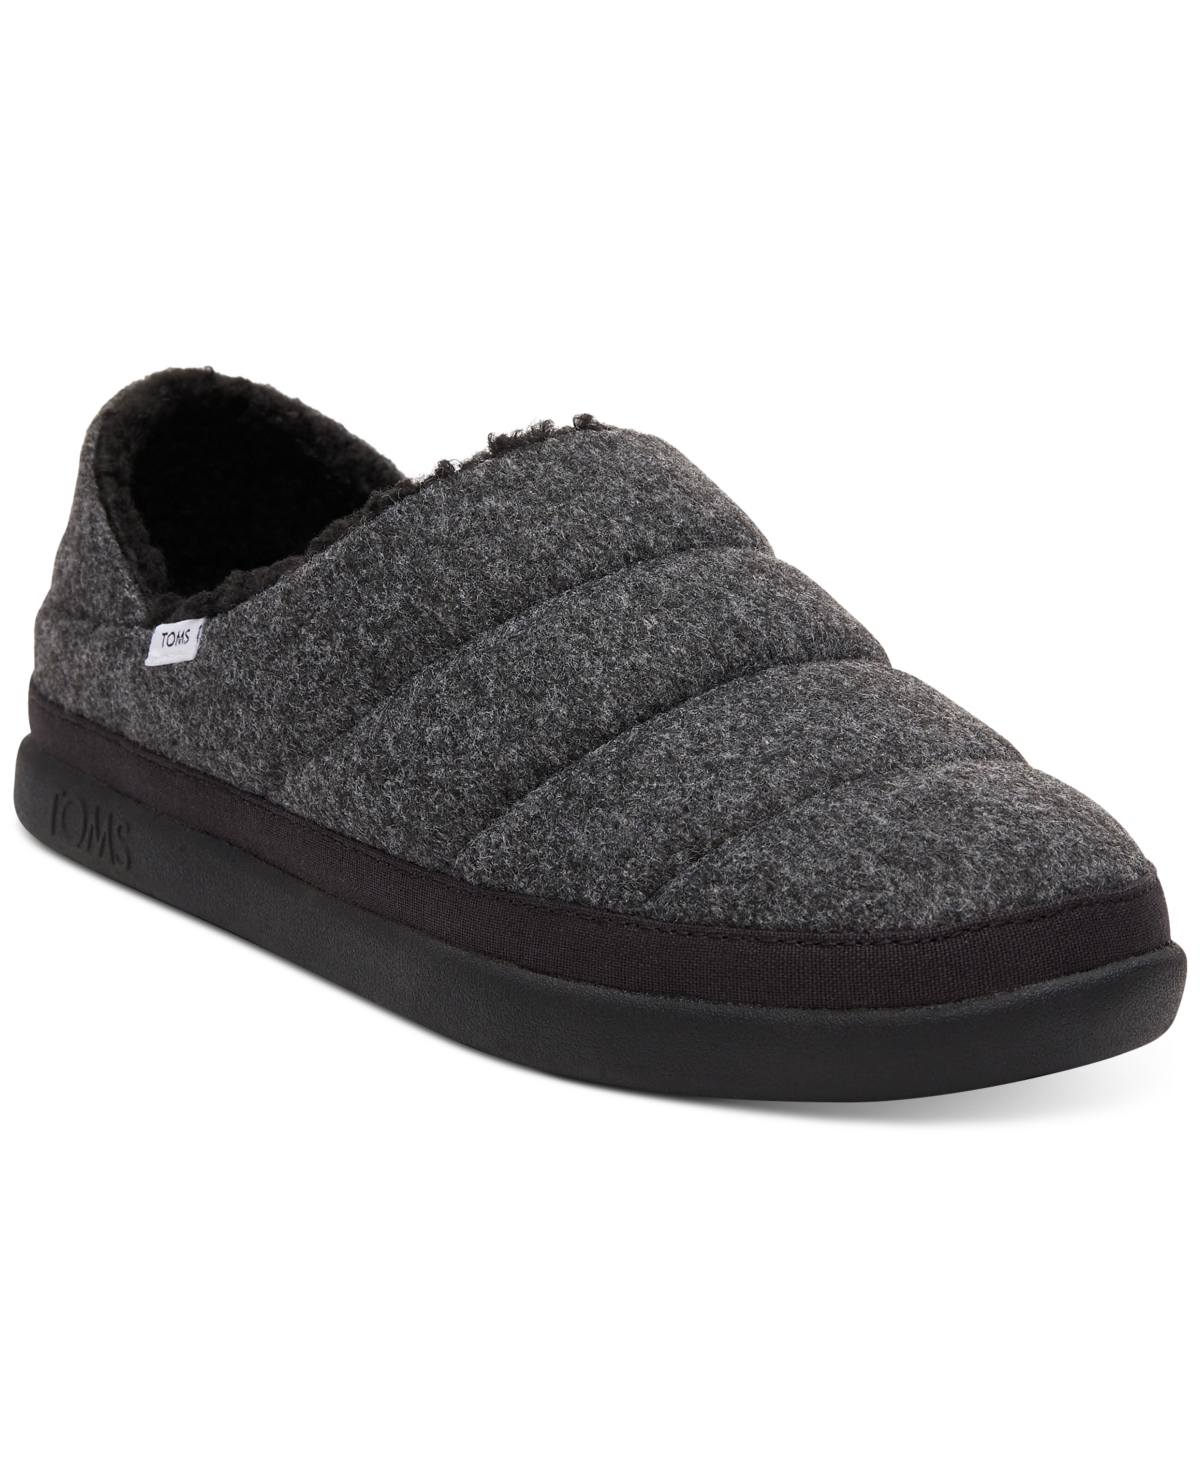 TOMS WOMEN'S EZRA QUILTED SLIP-ON SLIPPERS